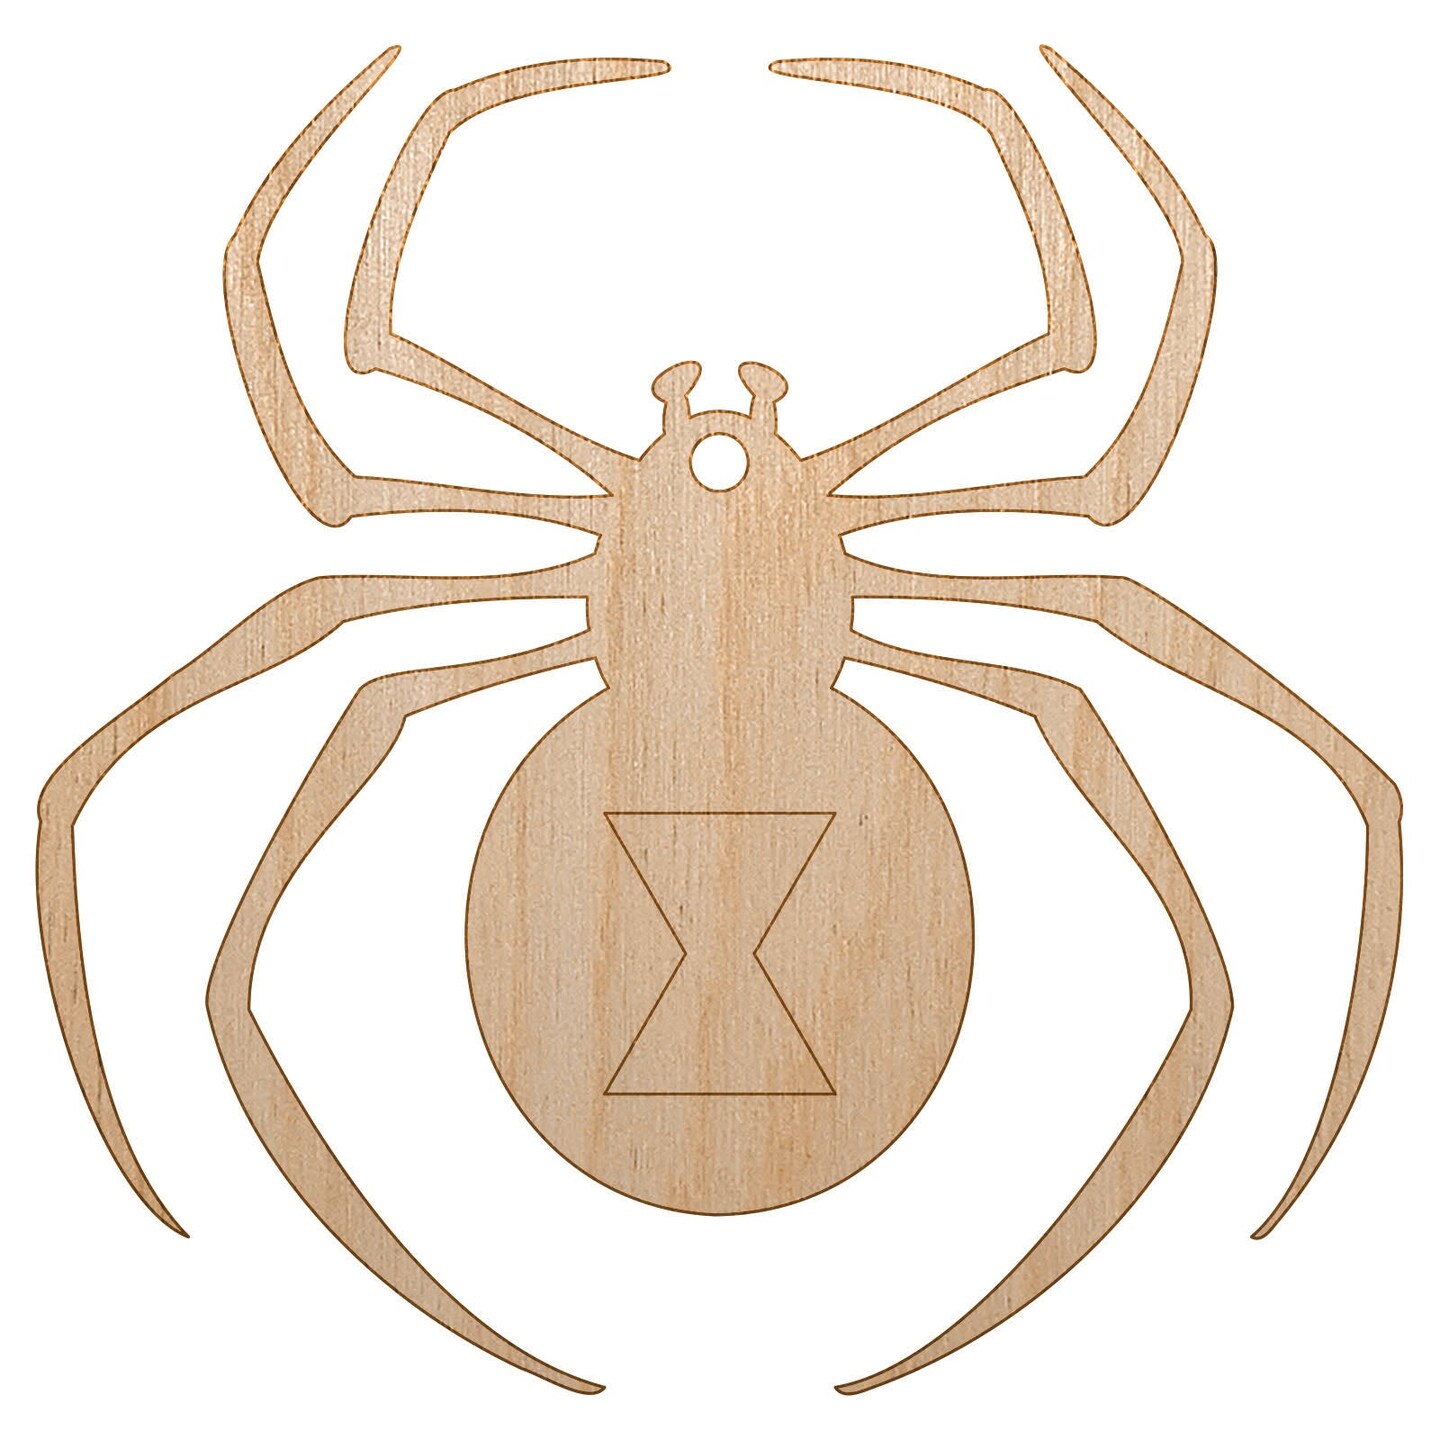 Black Widow Spider Unfinished Craft Wood Holiday Christmas Tree DIY Pre-Drilled Ornament